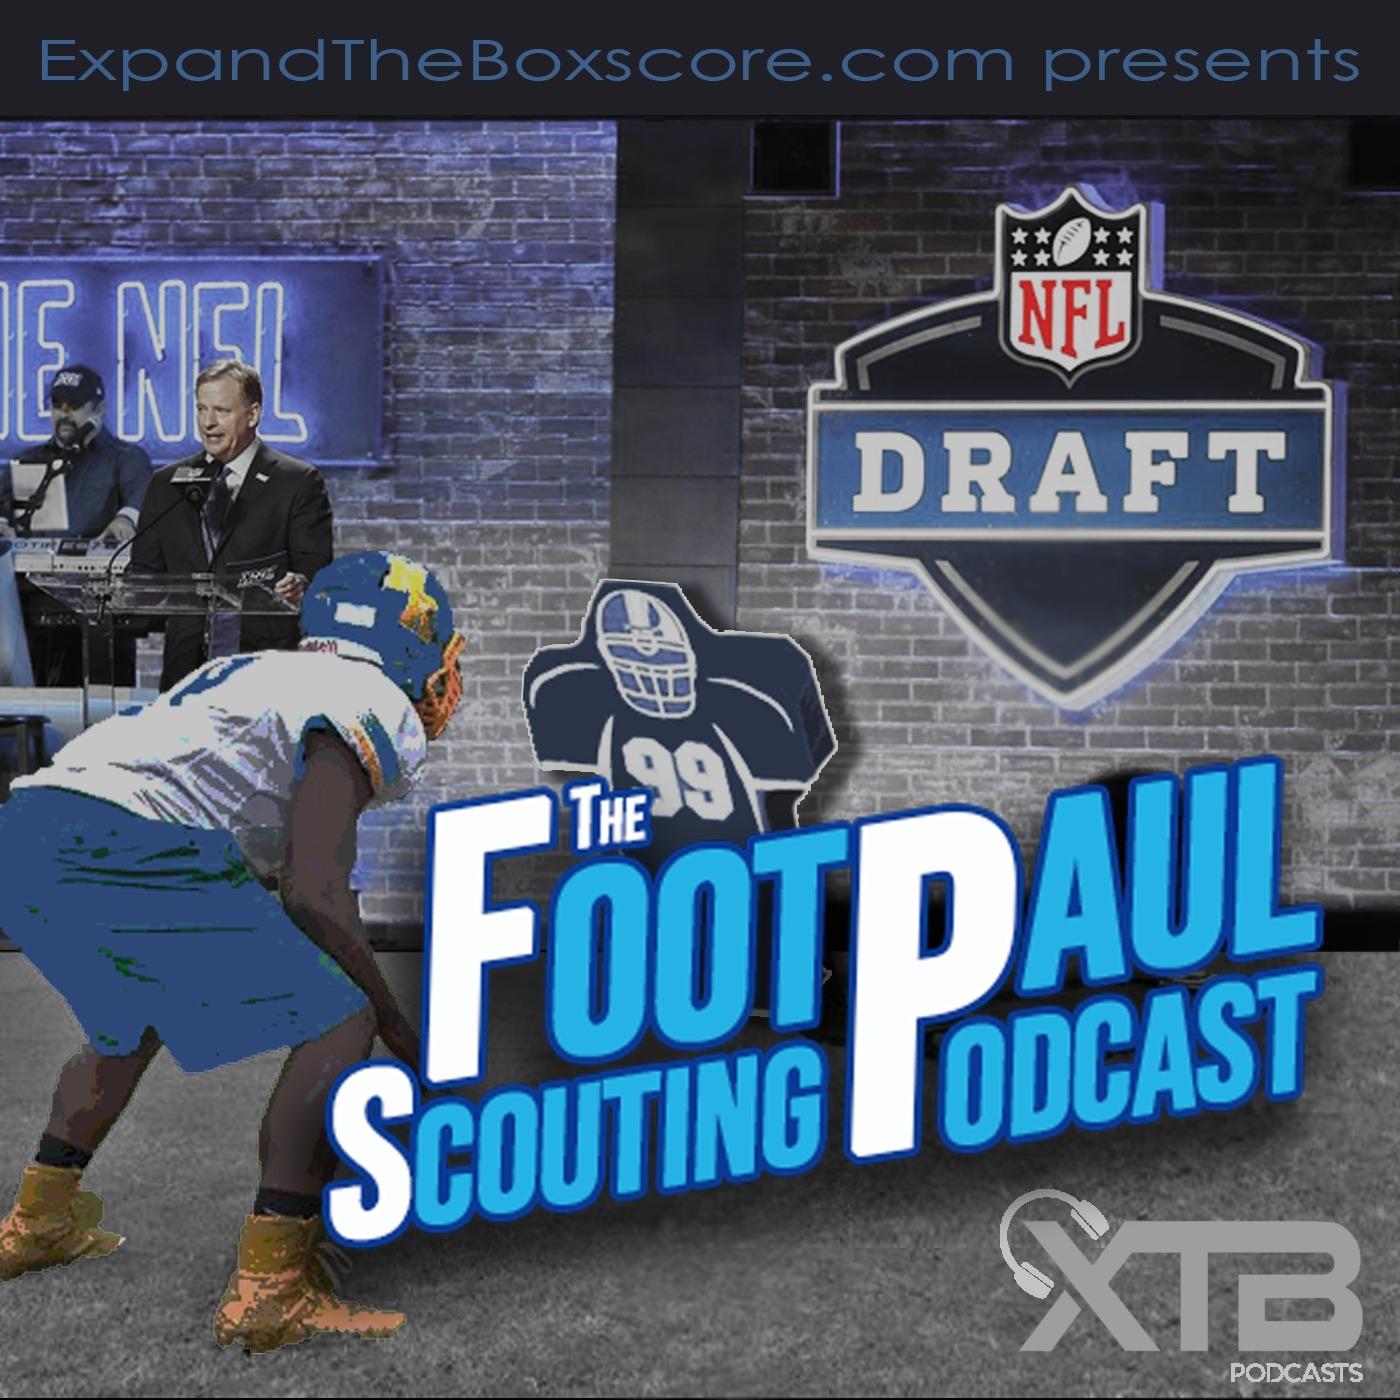 TheFootPaul's Scouting Podcast